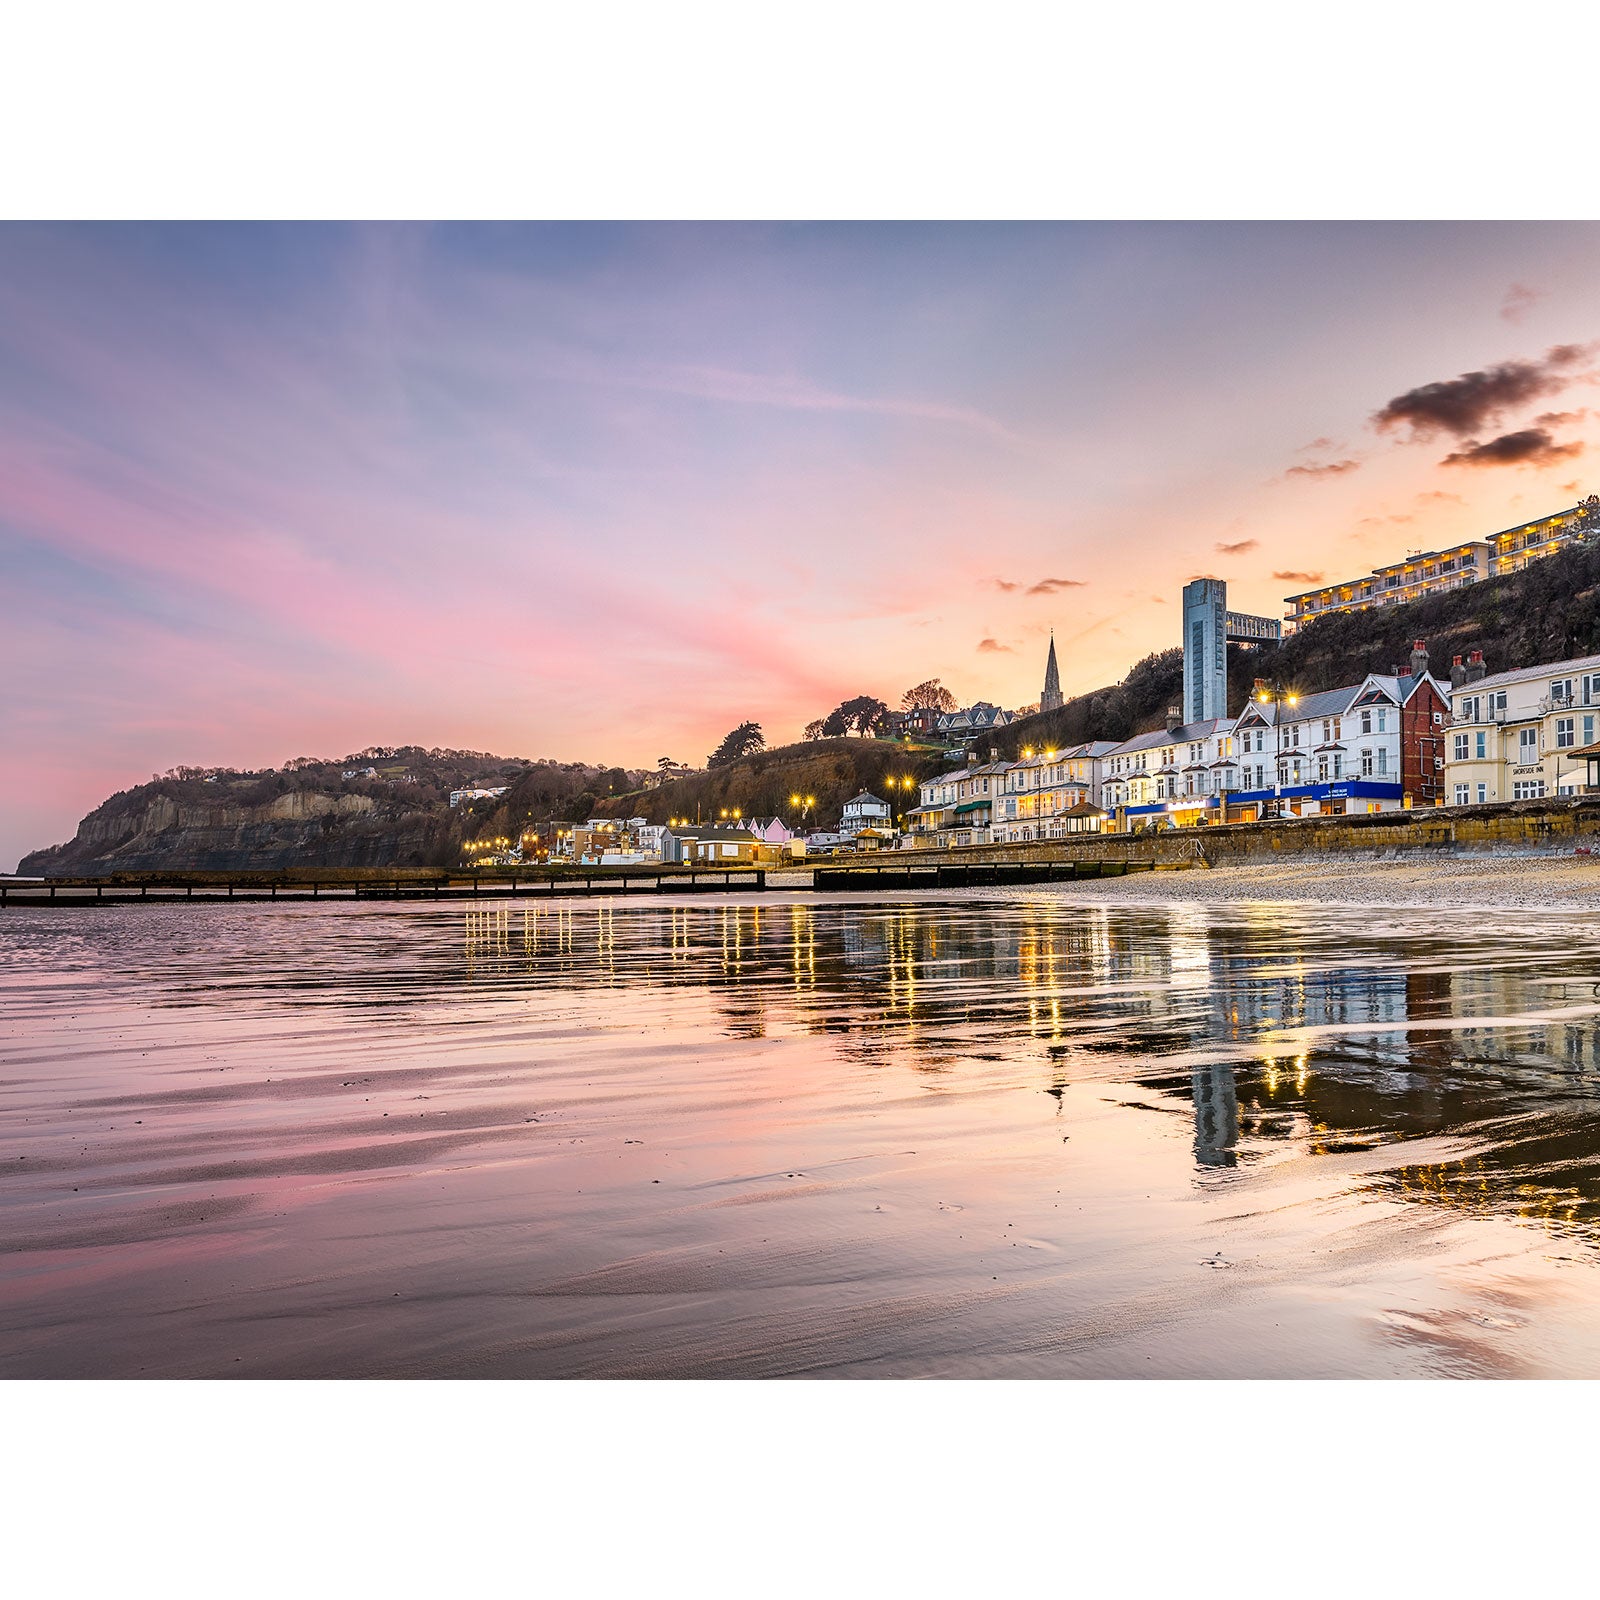 Coastal town at sunset with buildings reflecting on Shanklin Beach water by Available Light Photography.